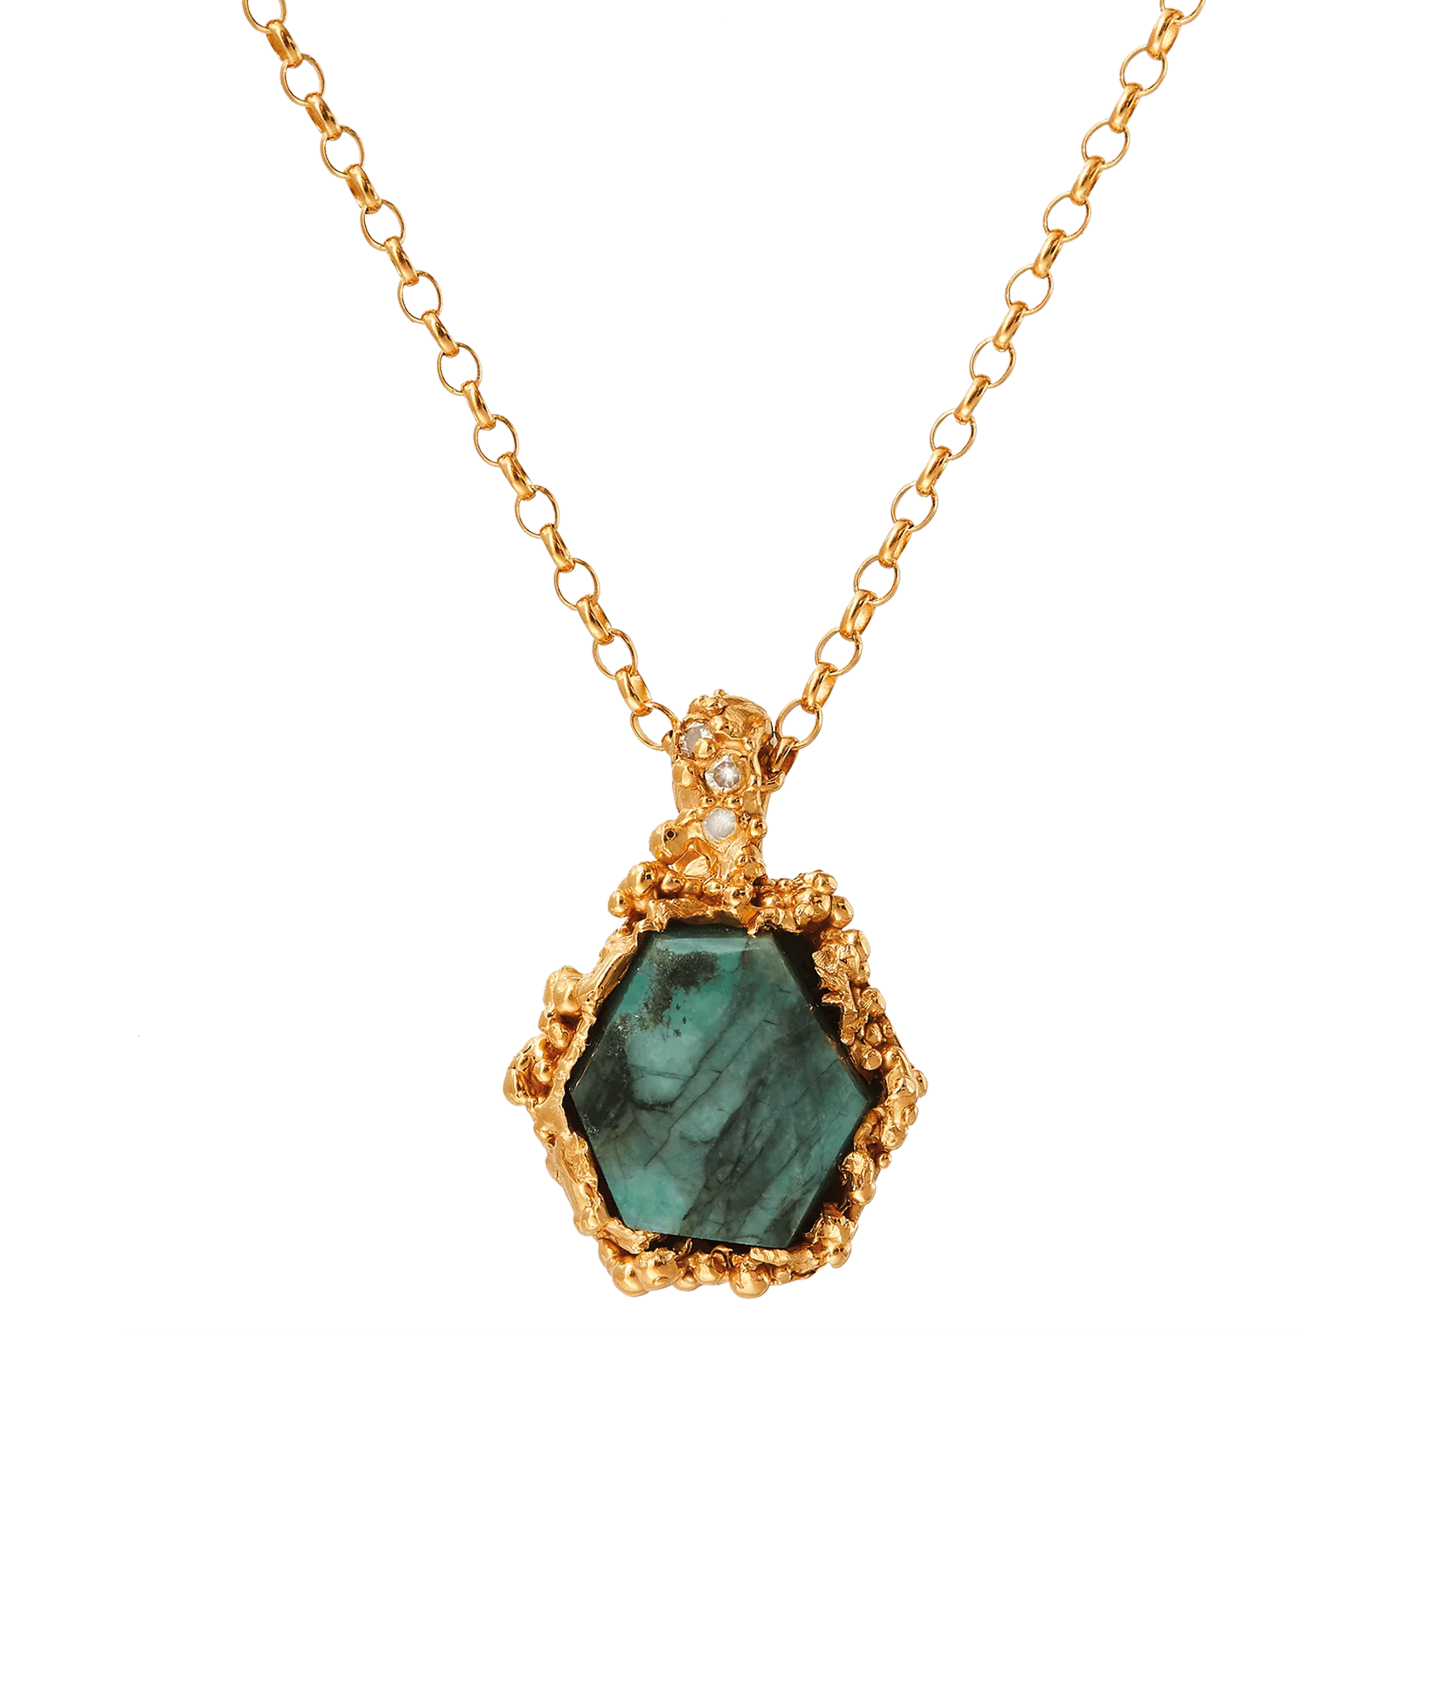 The Call of the Homeland Emerald and Diamond Necklace